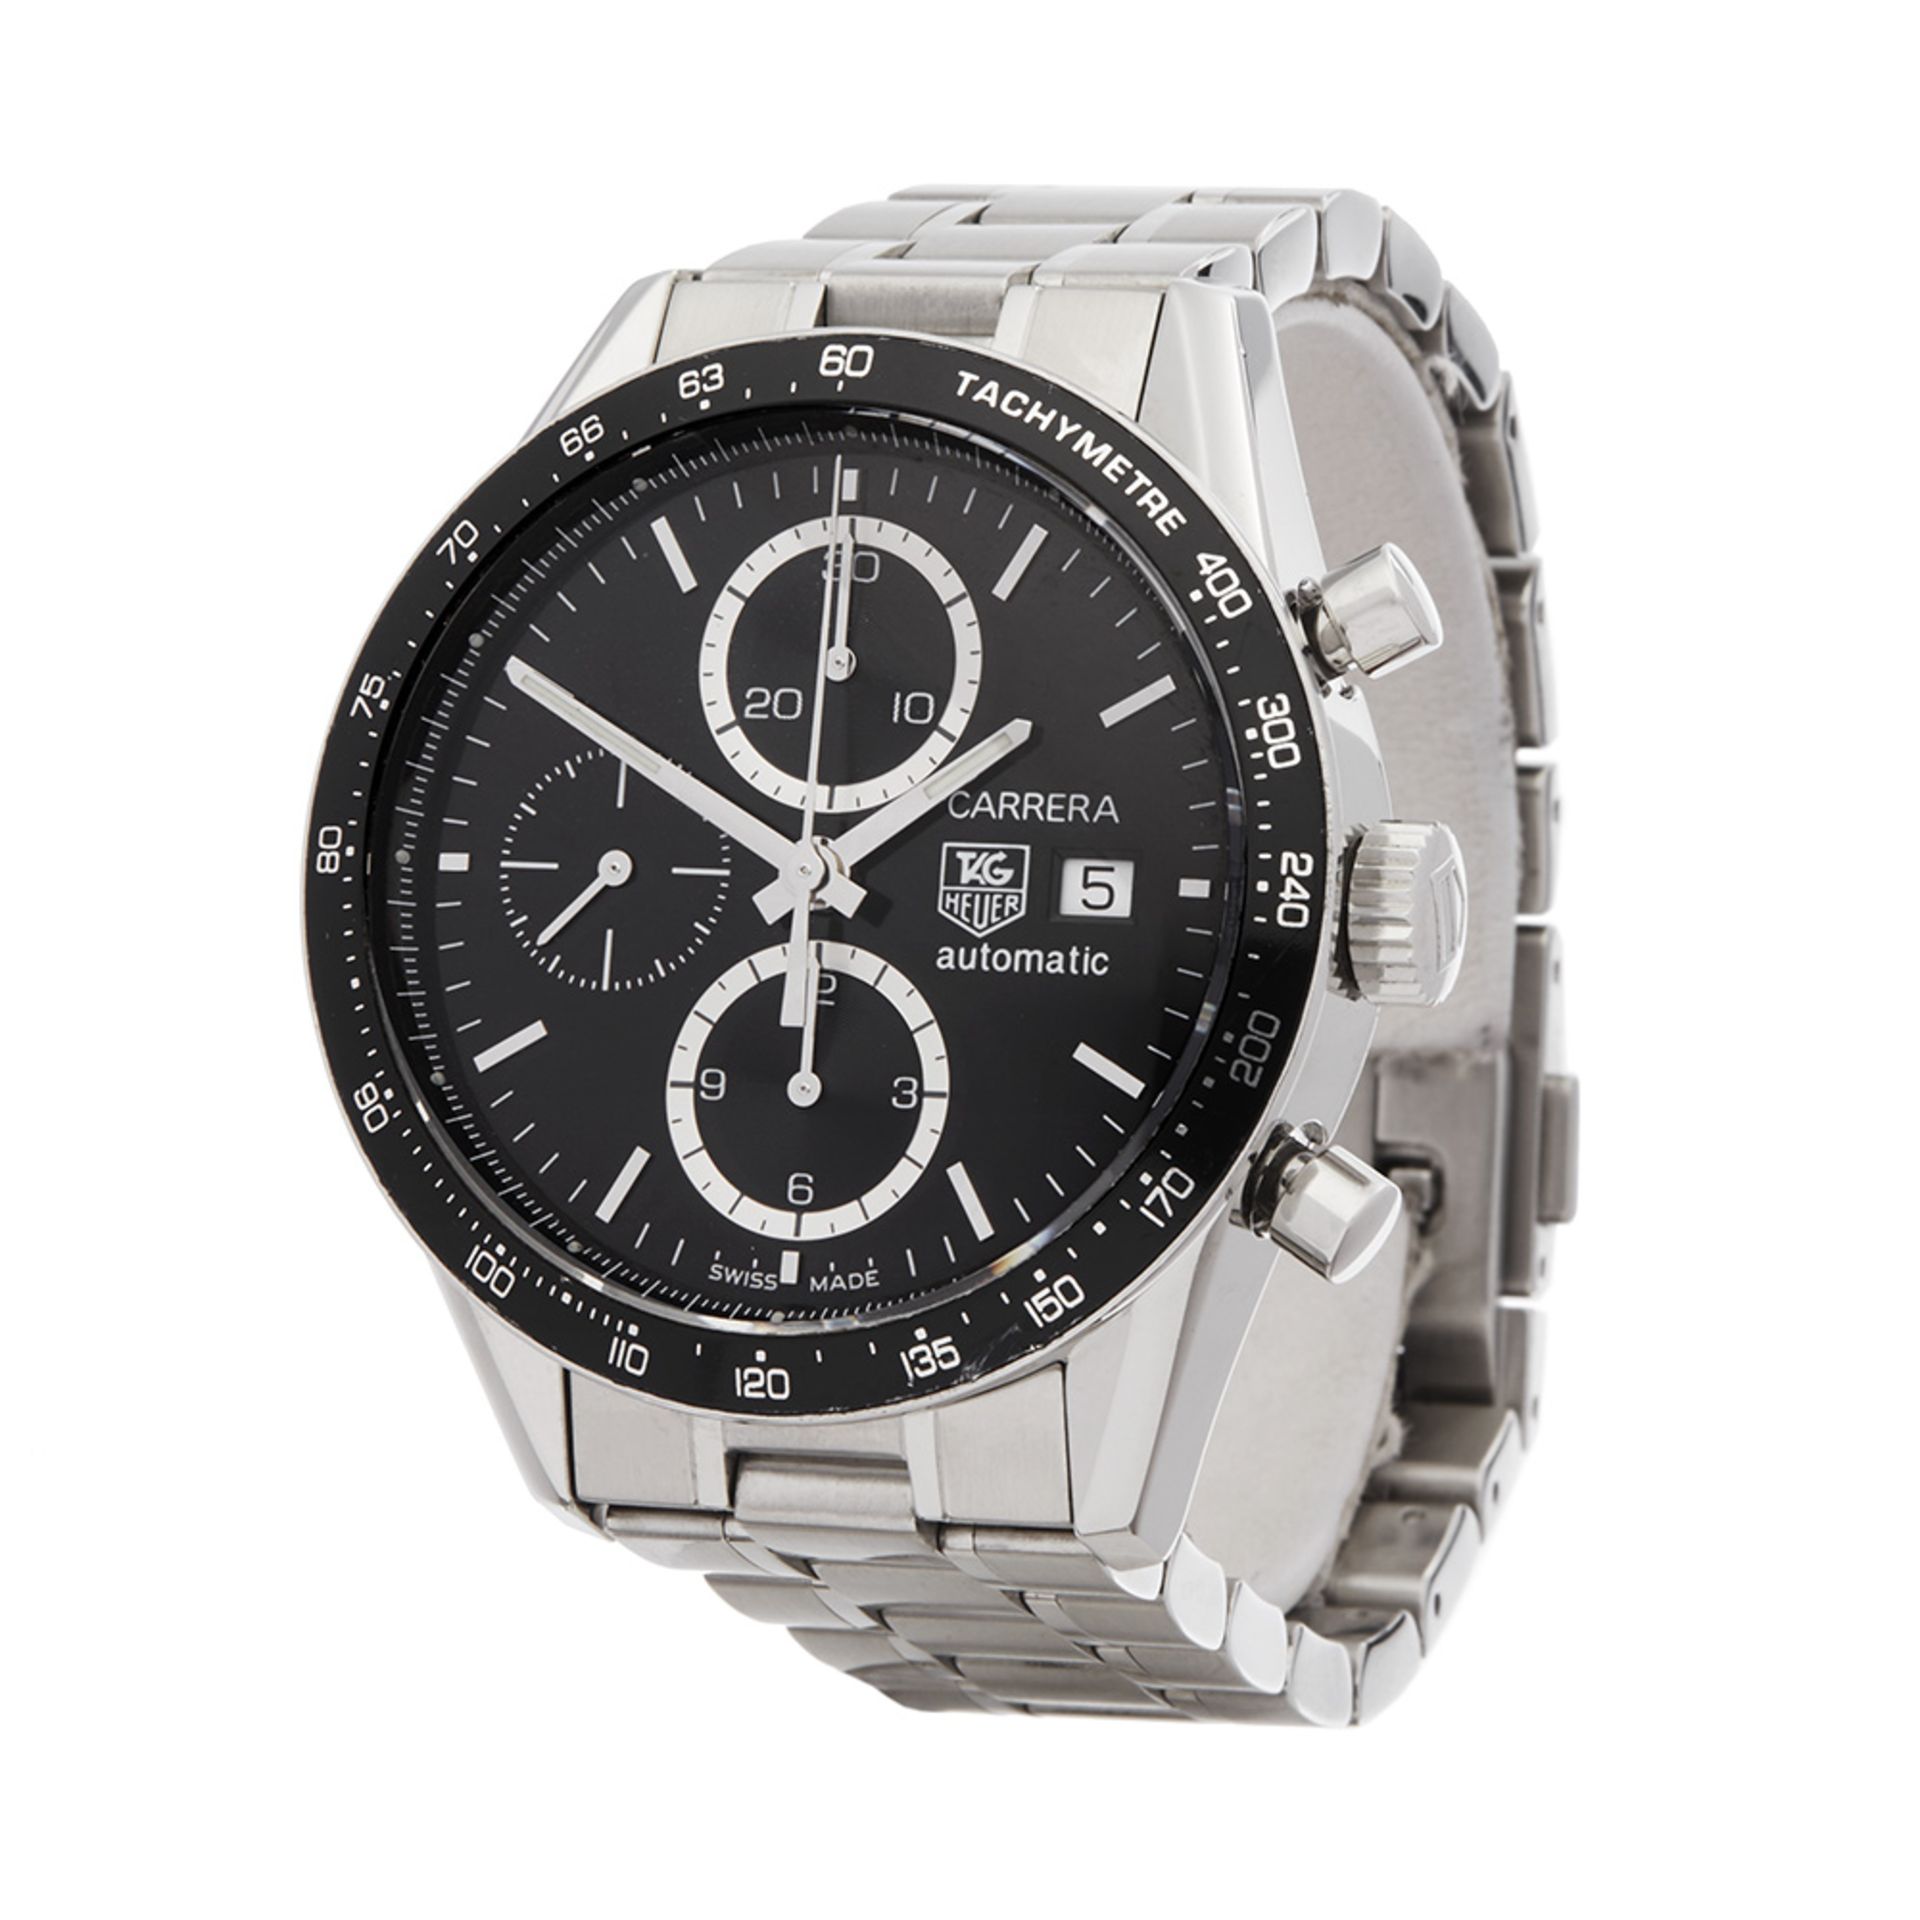 Tag Heuer Carrera - Image 3 of 7